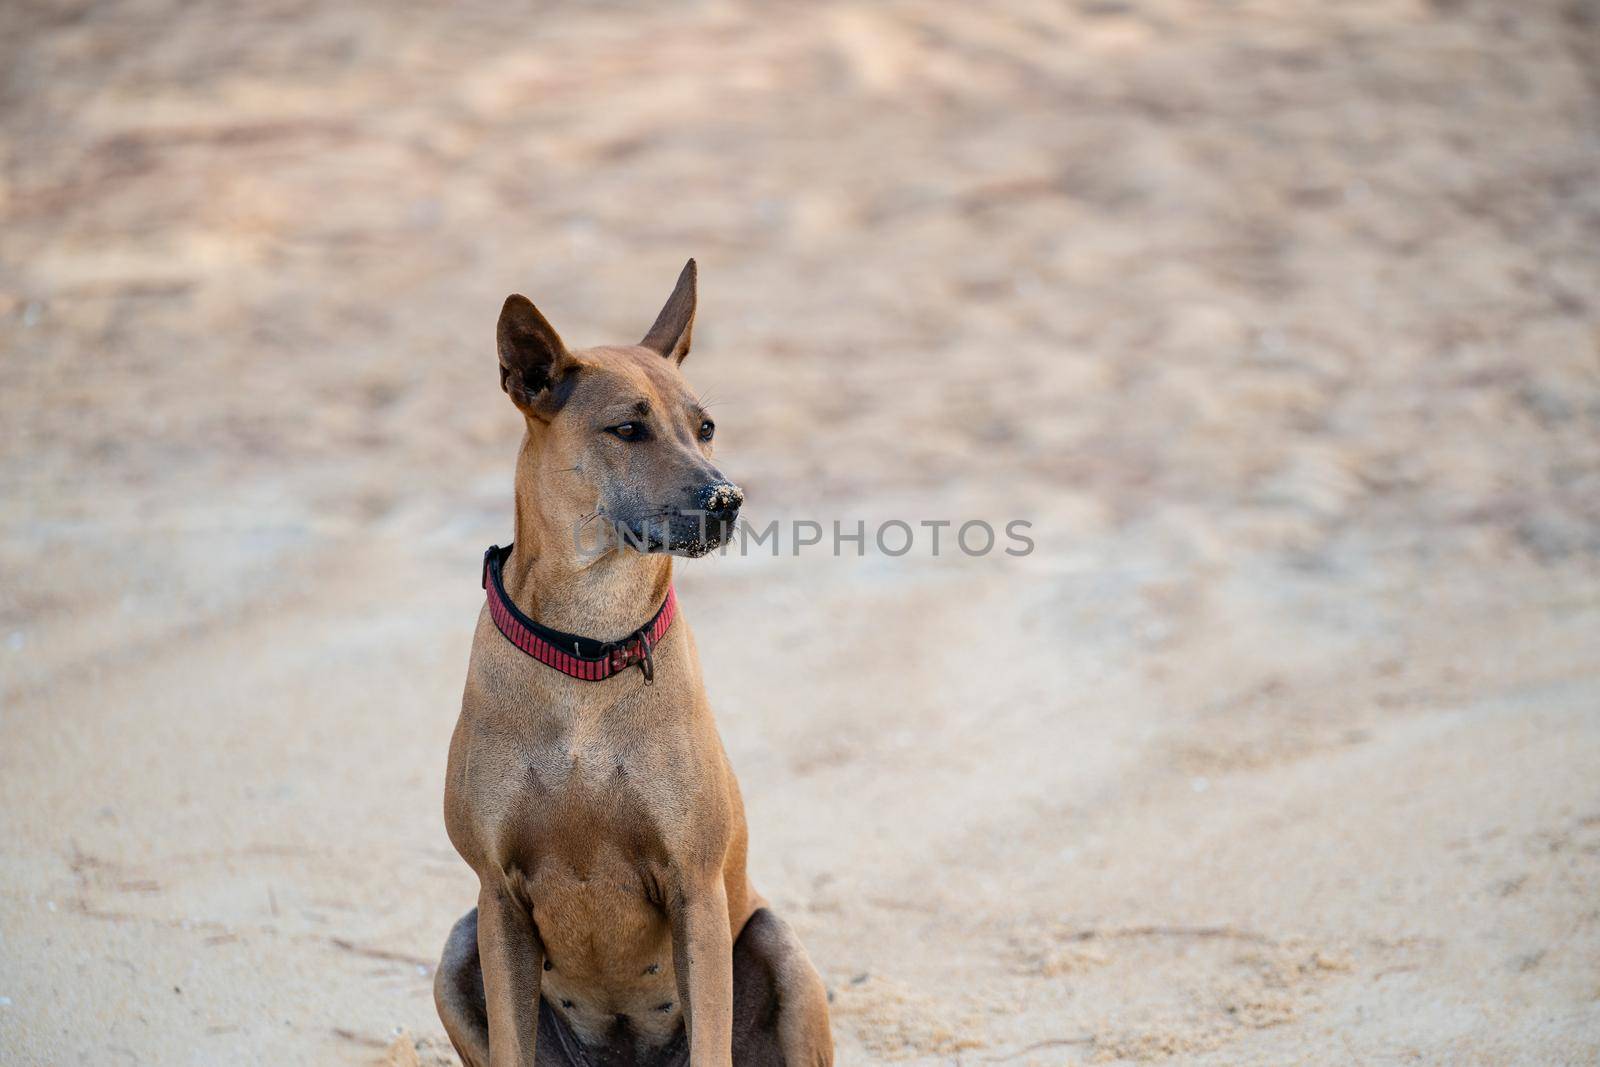 A brown dog sitting on the sand beach looking at something.